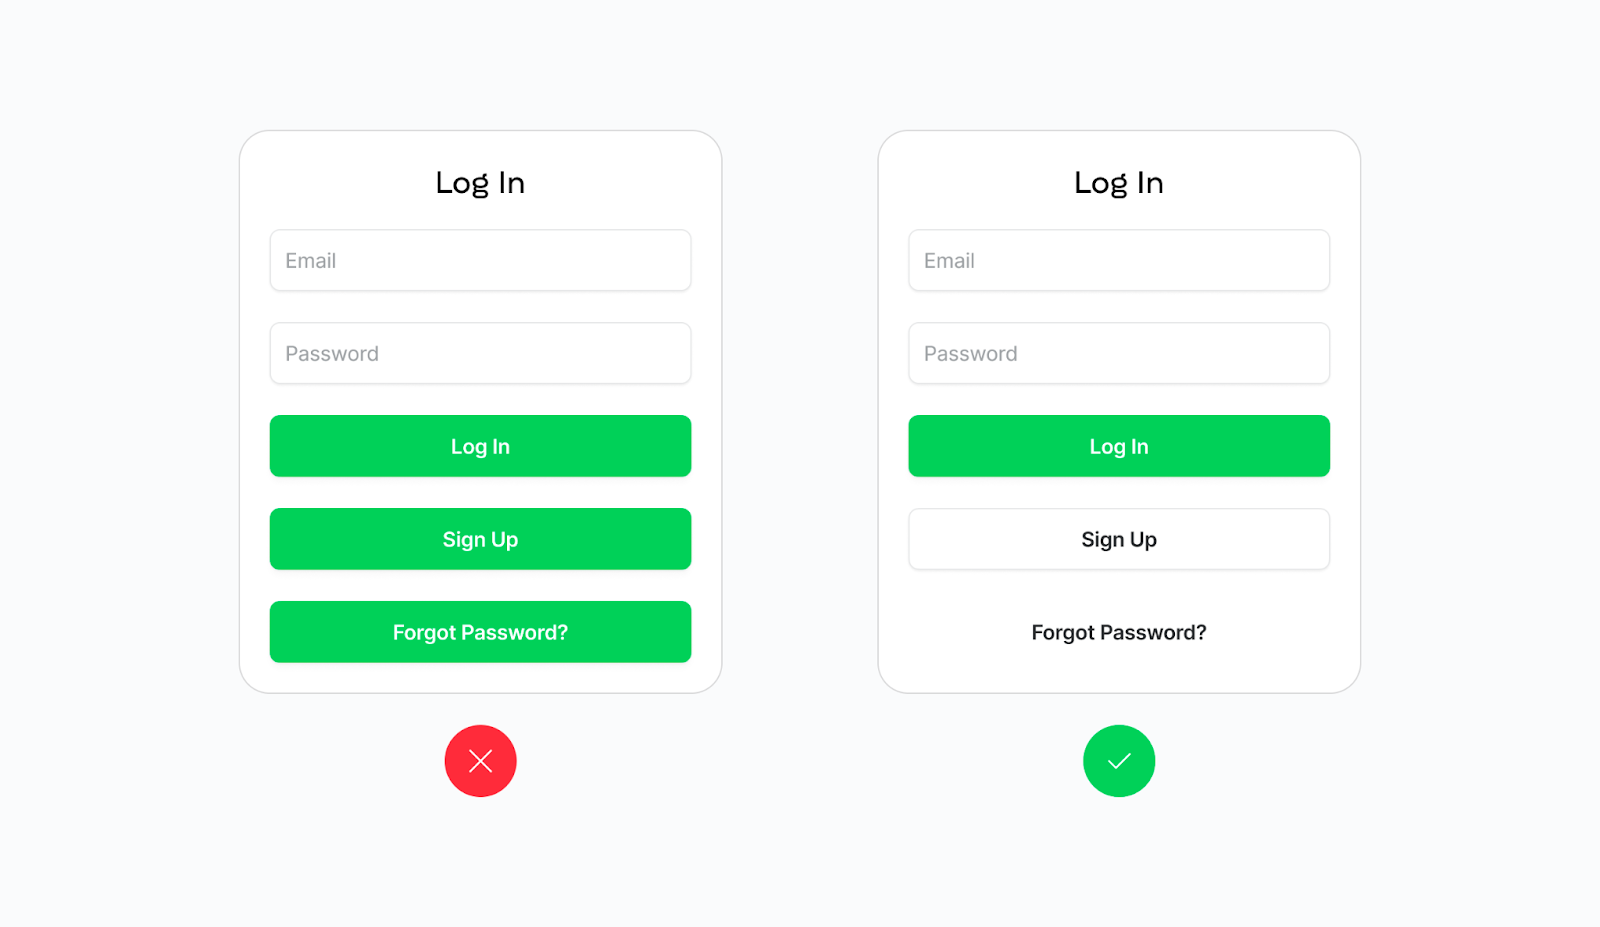 How to identify and fix app design issues. Color contrast